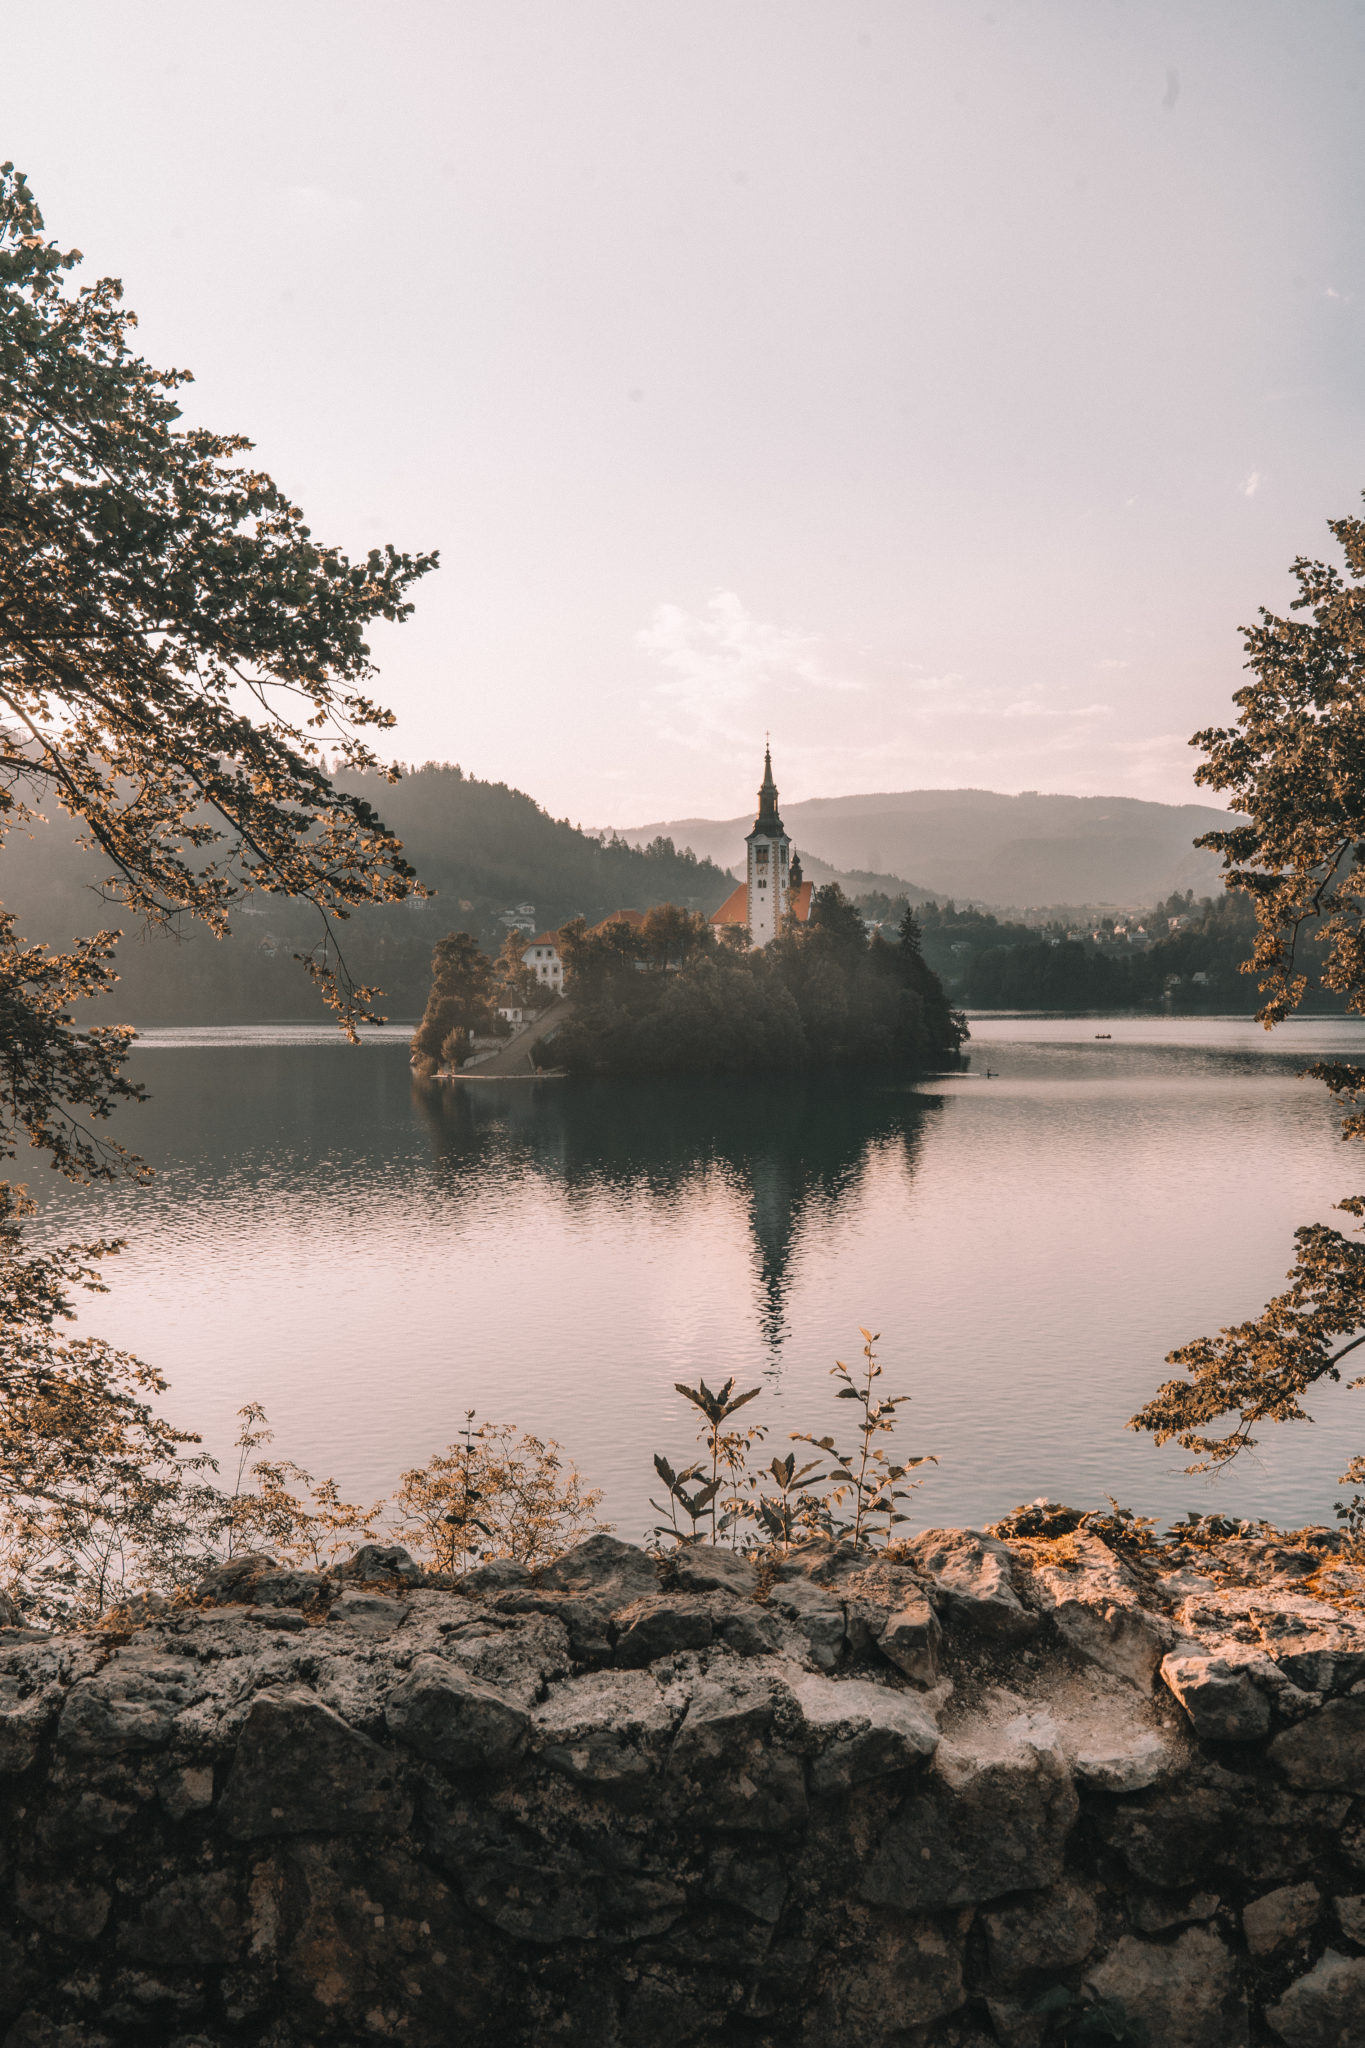 Best viewpoints for Lake Bled - Laugh Travel Eat